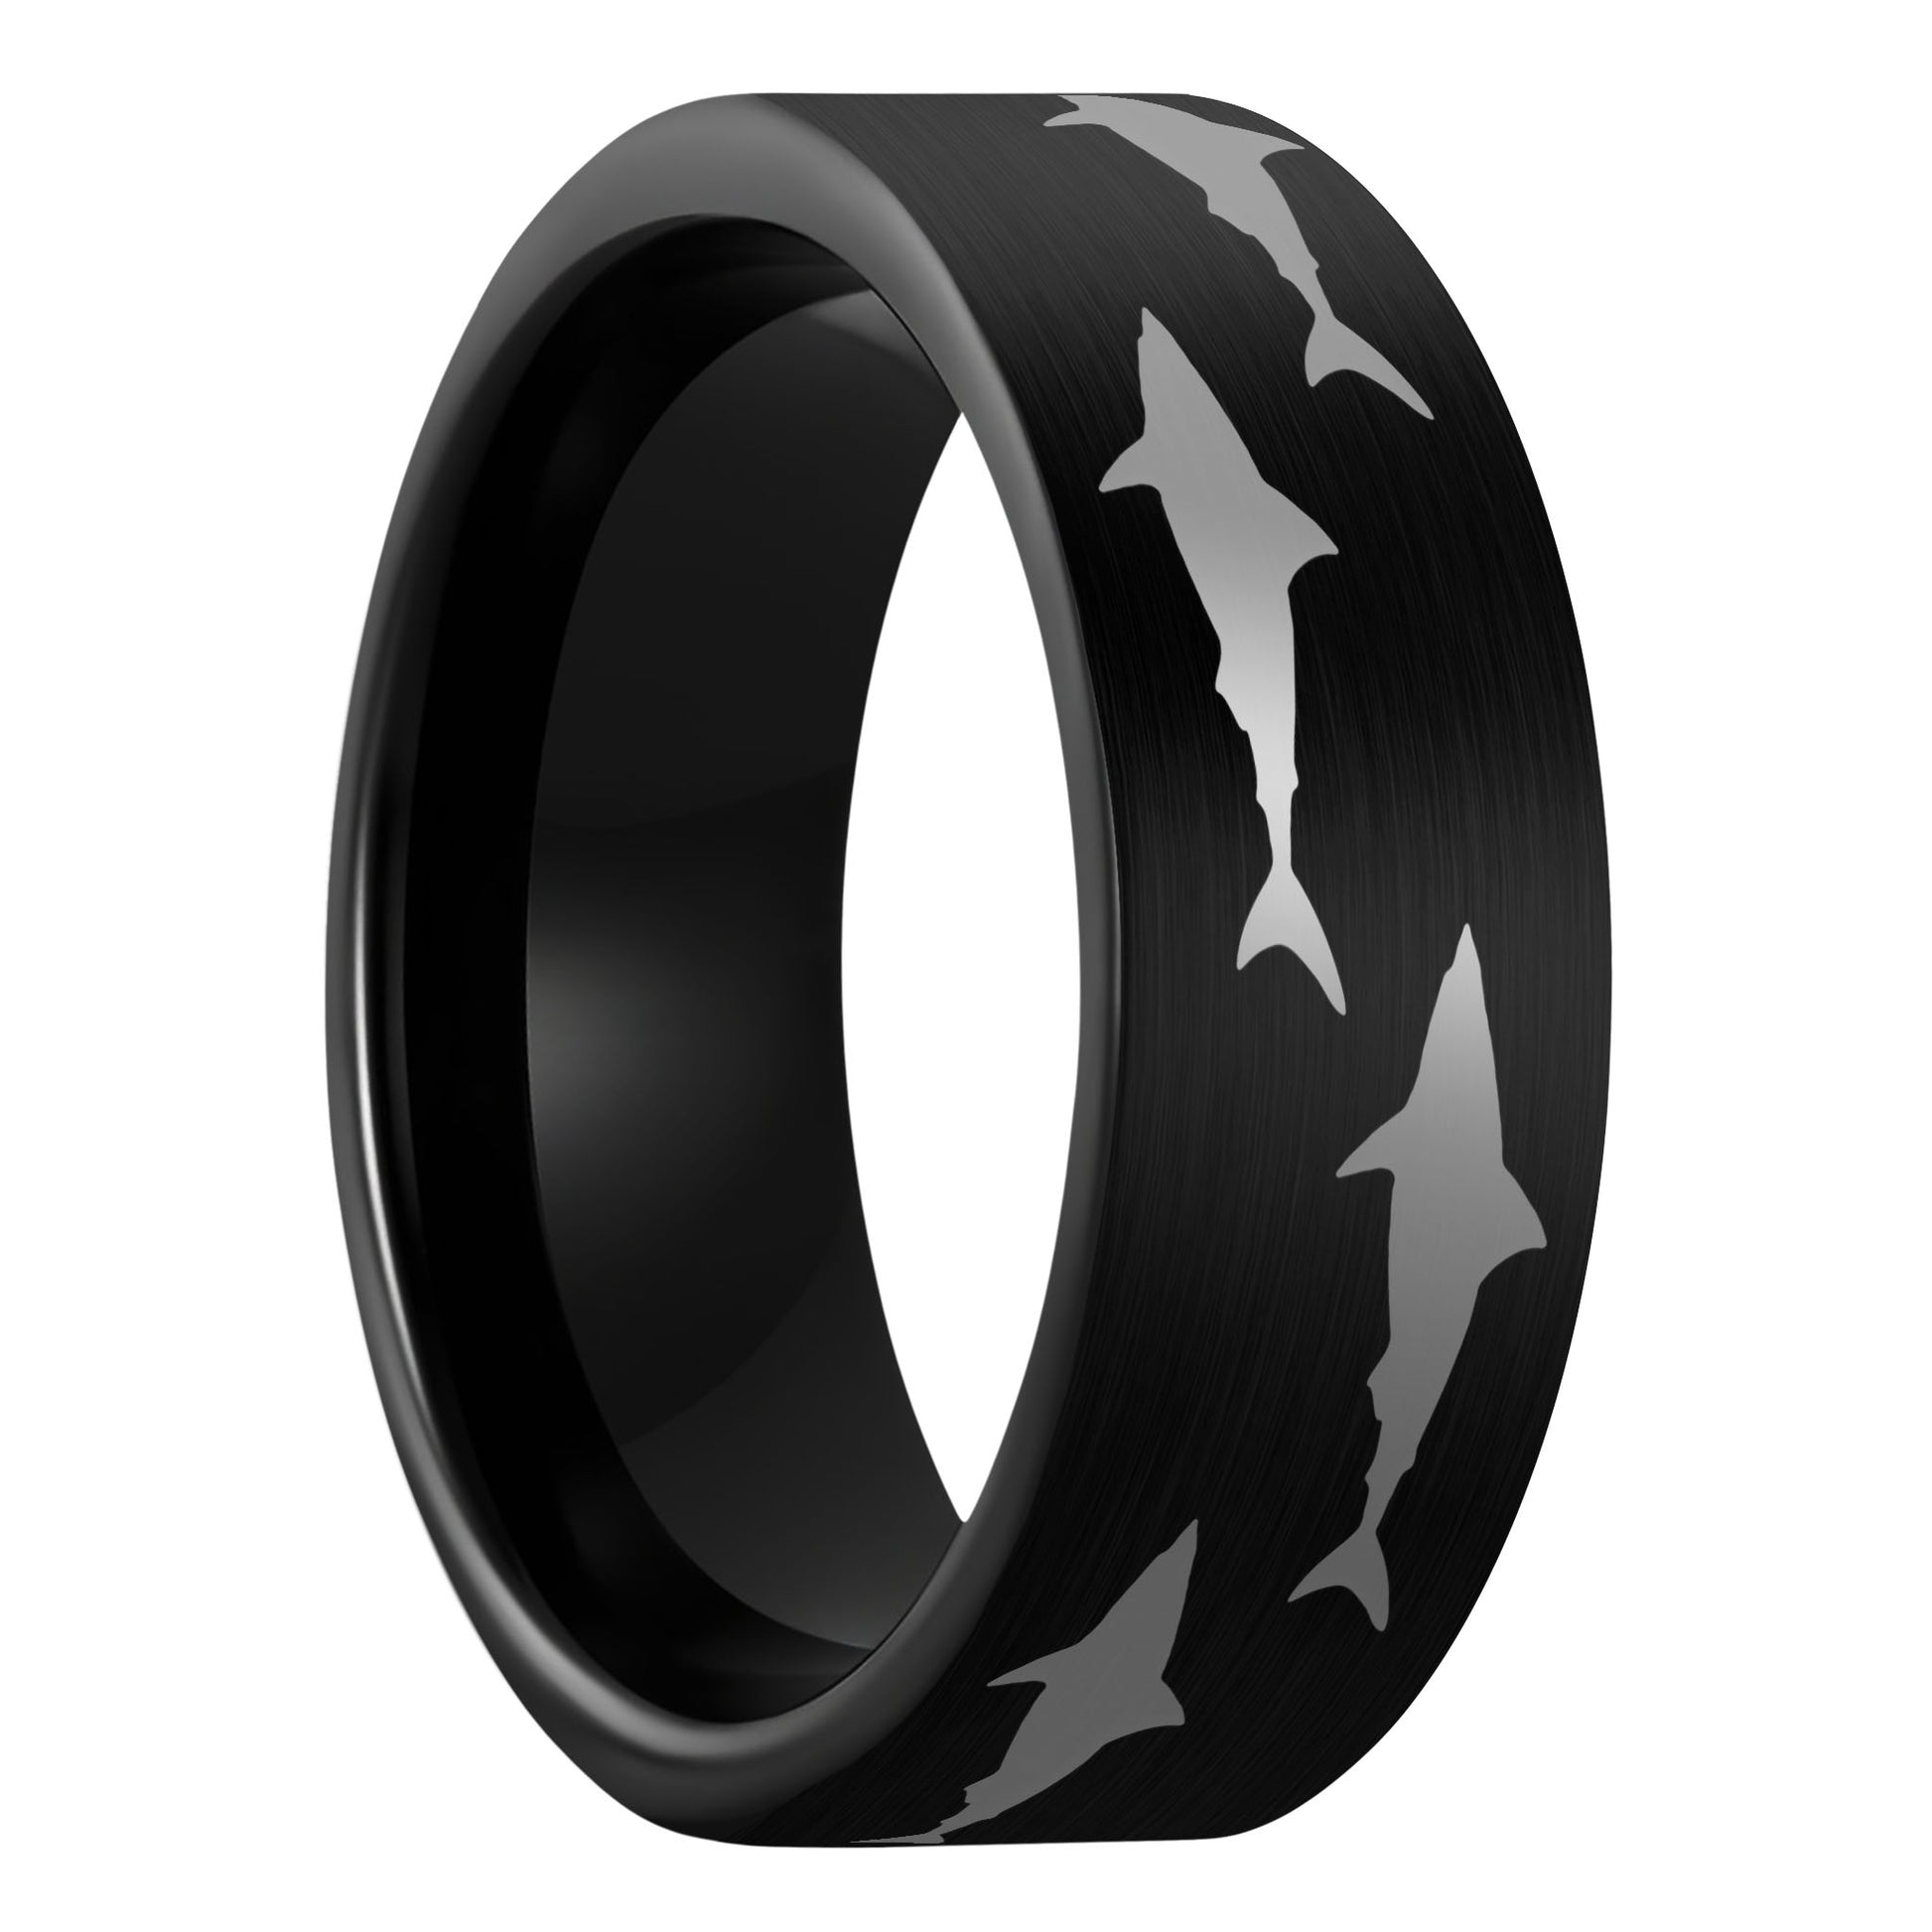 A shark brushed black tungsten men's wedding band displayed on a plain white background.